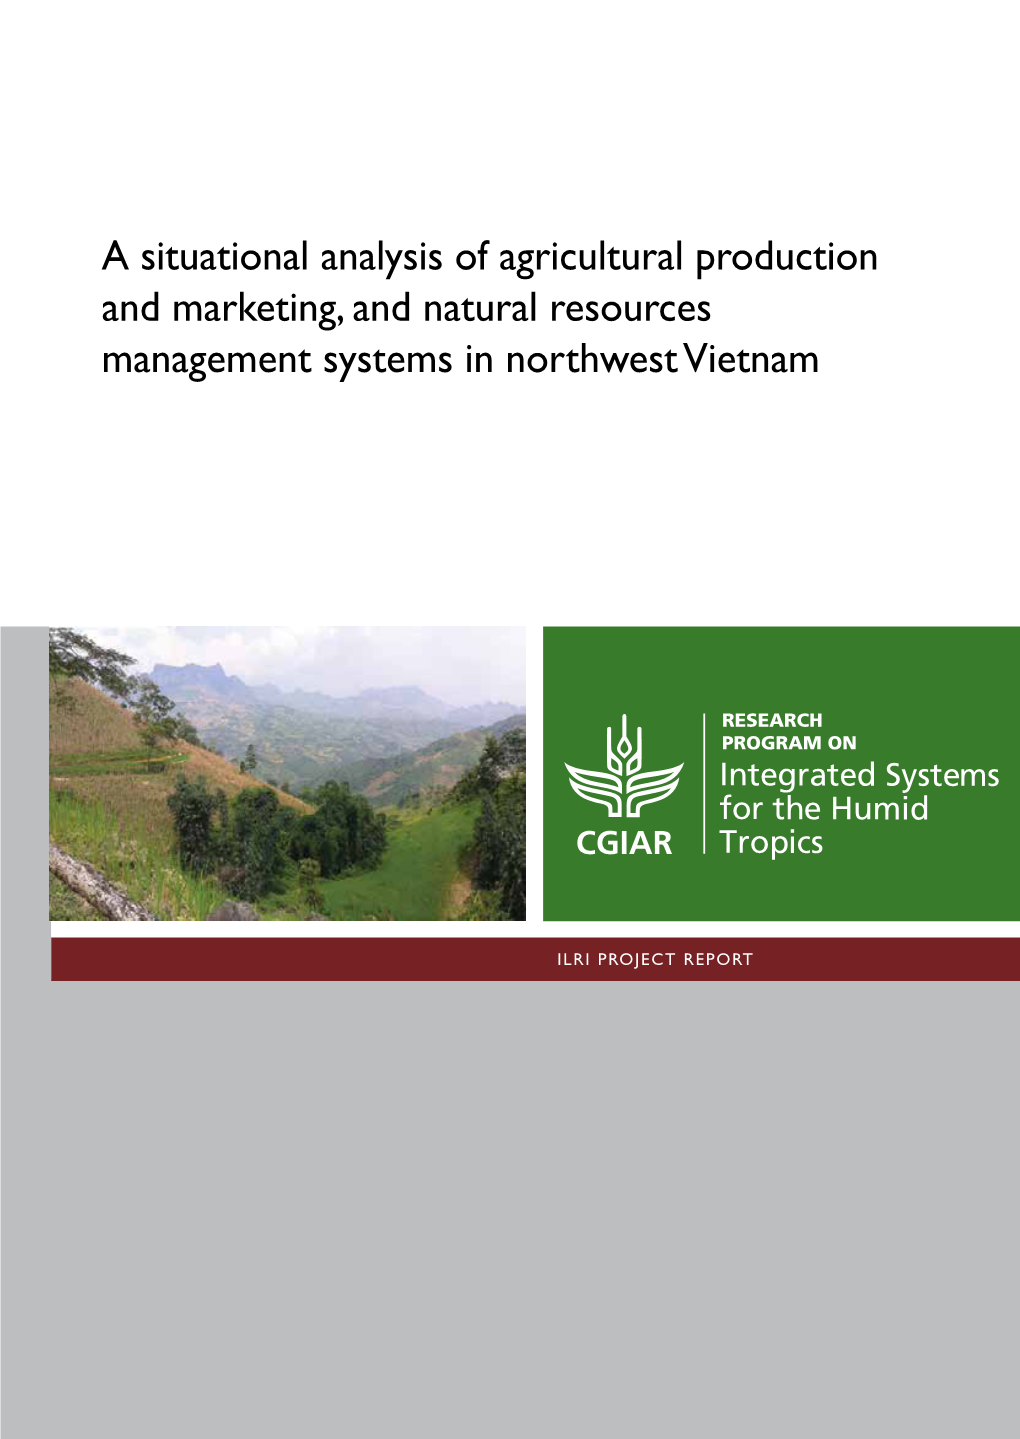 A Situational Analysis of Agricultural Production and Marketing, and Natural Resources Management Systems in Northwest Vietnam